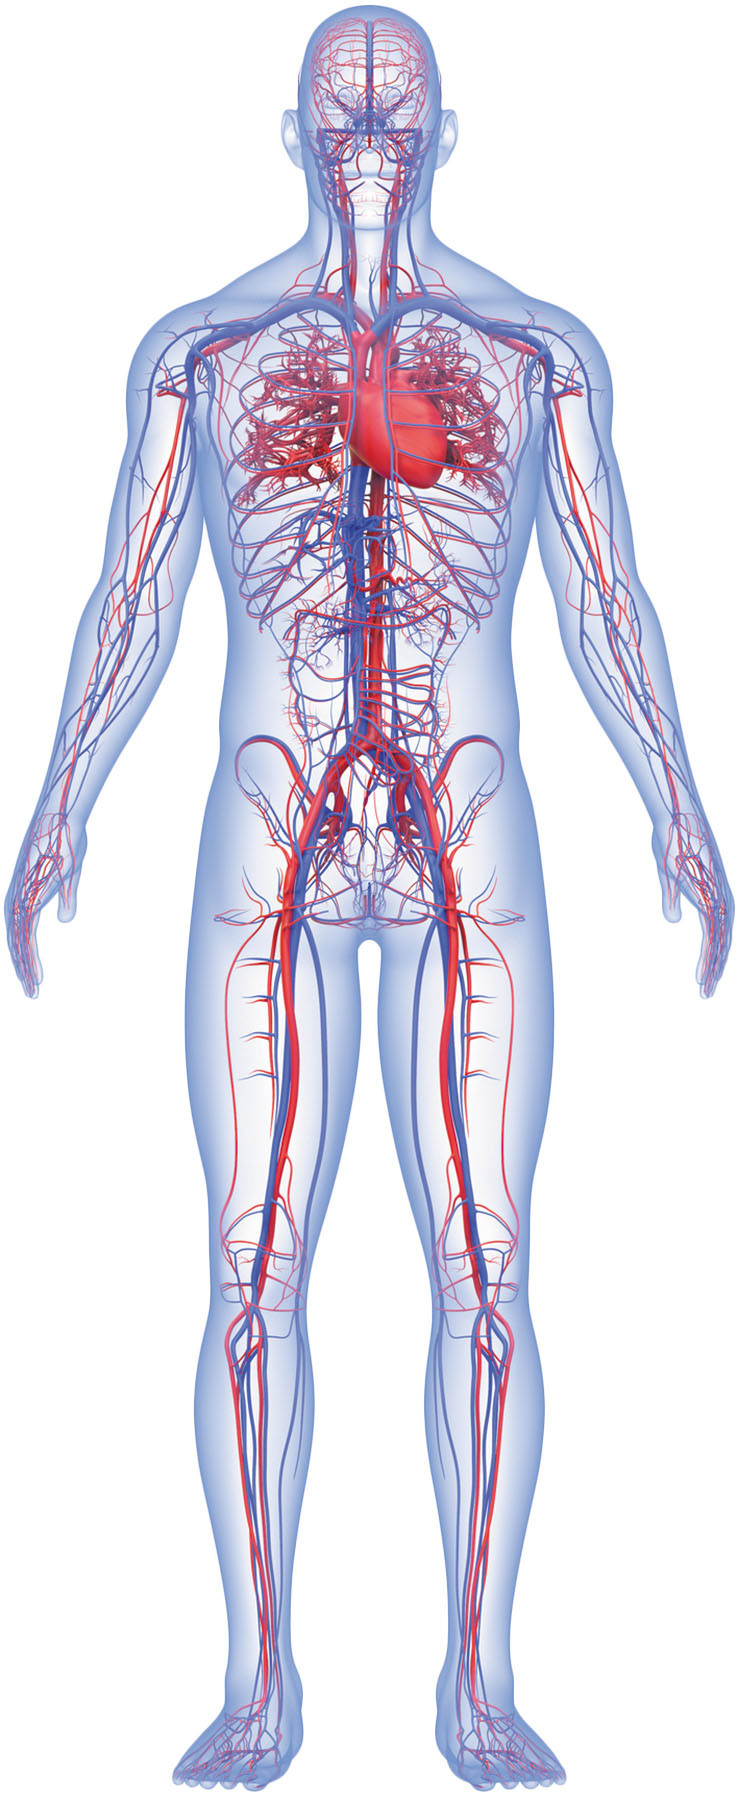 illustration of the human body's circulatory system